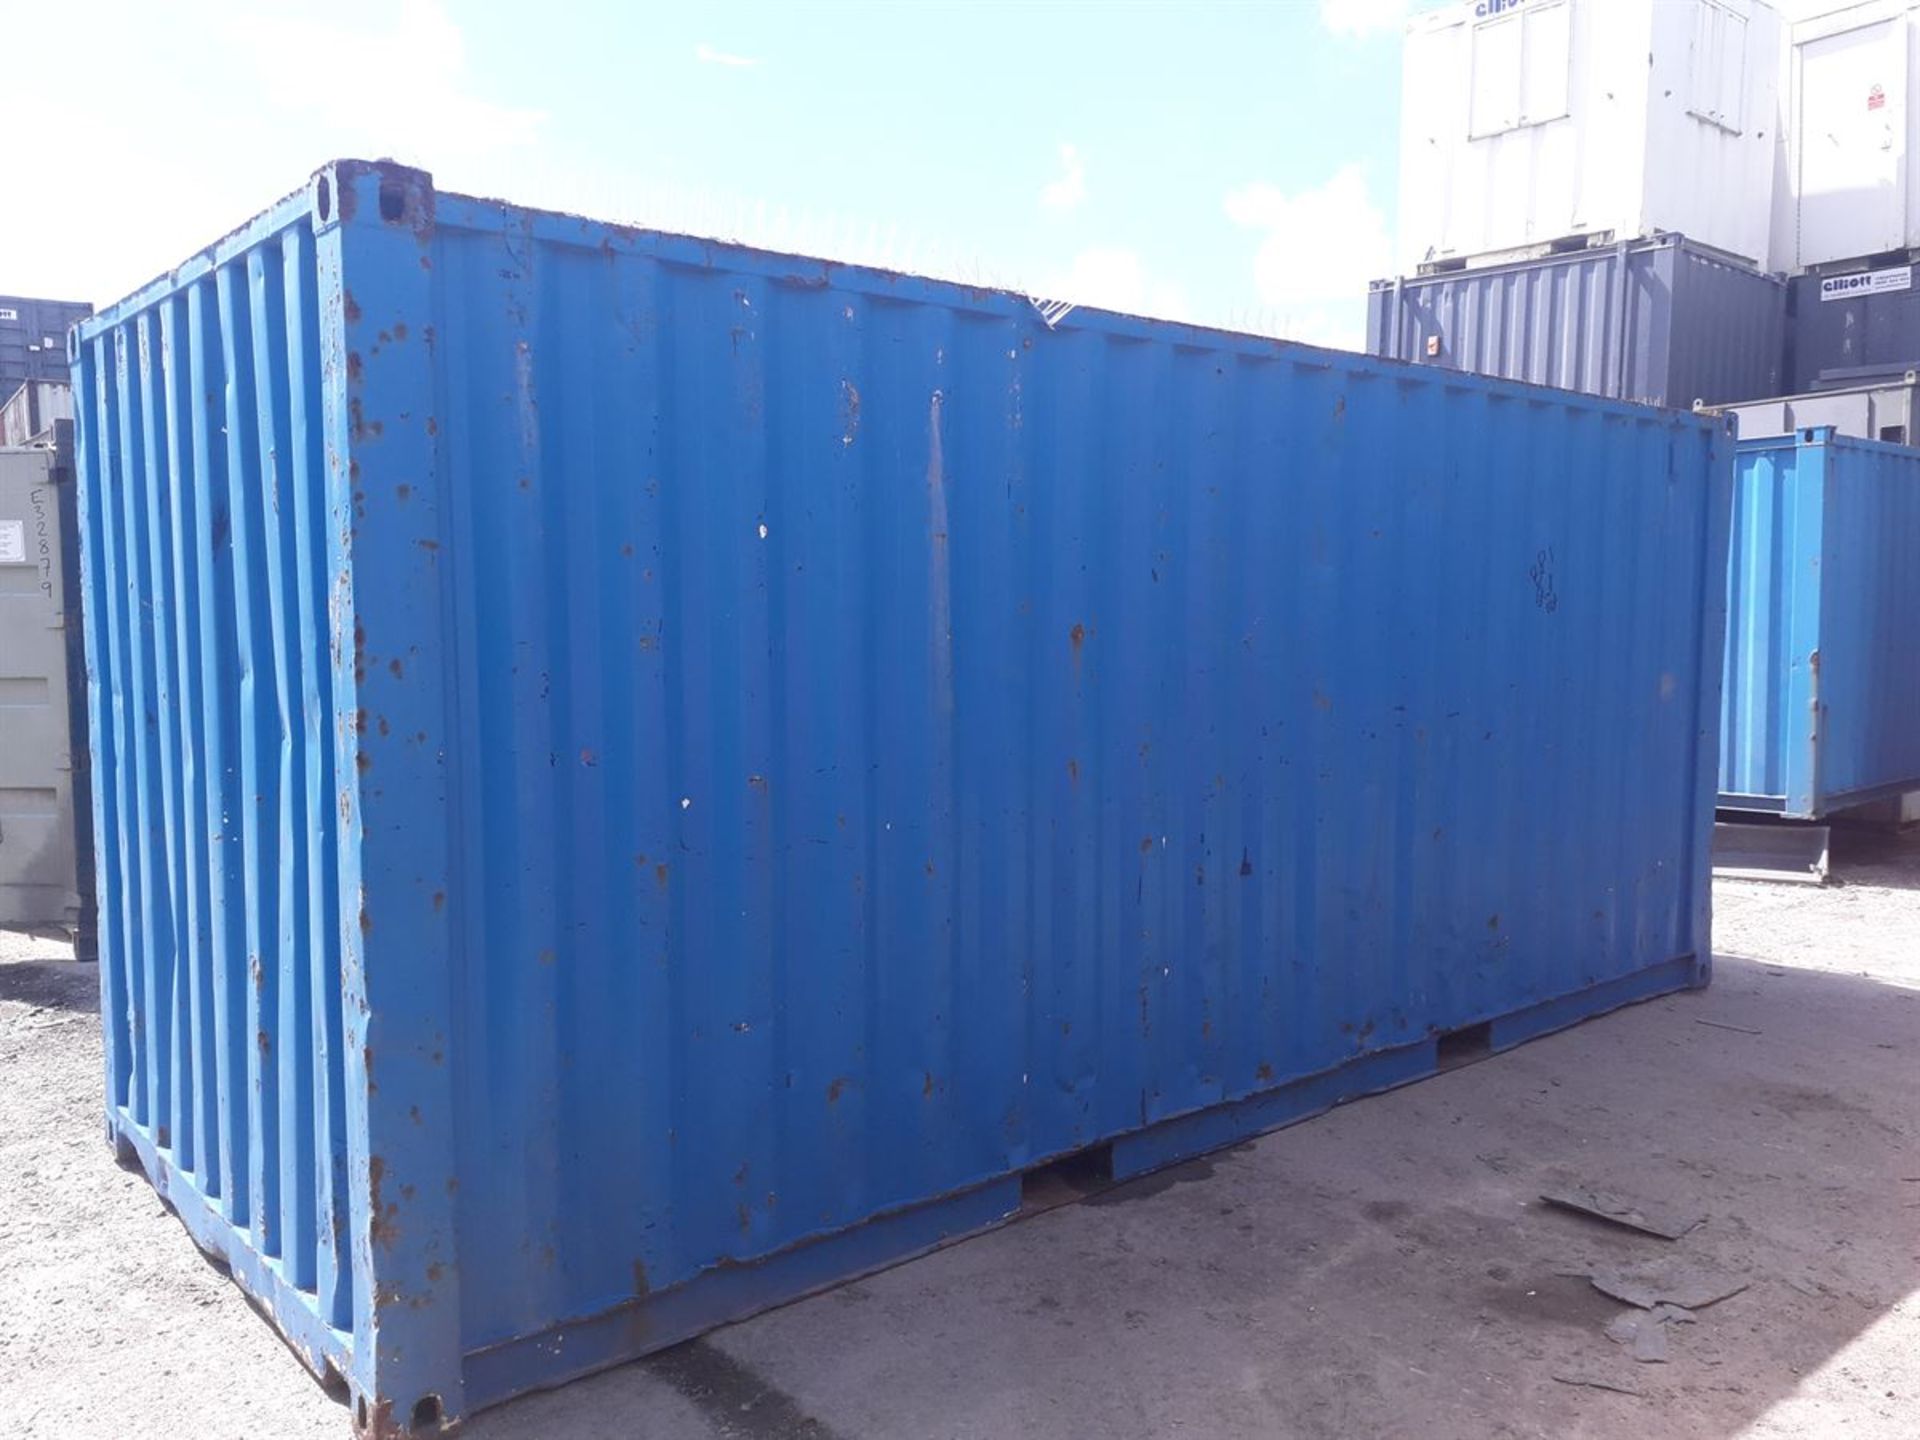 esp16090 20ft x 8ft Secure Container - Image 2 of 4